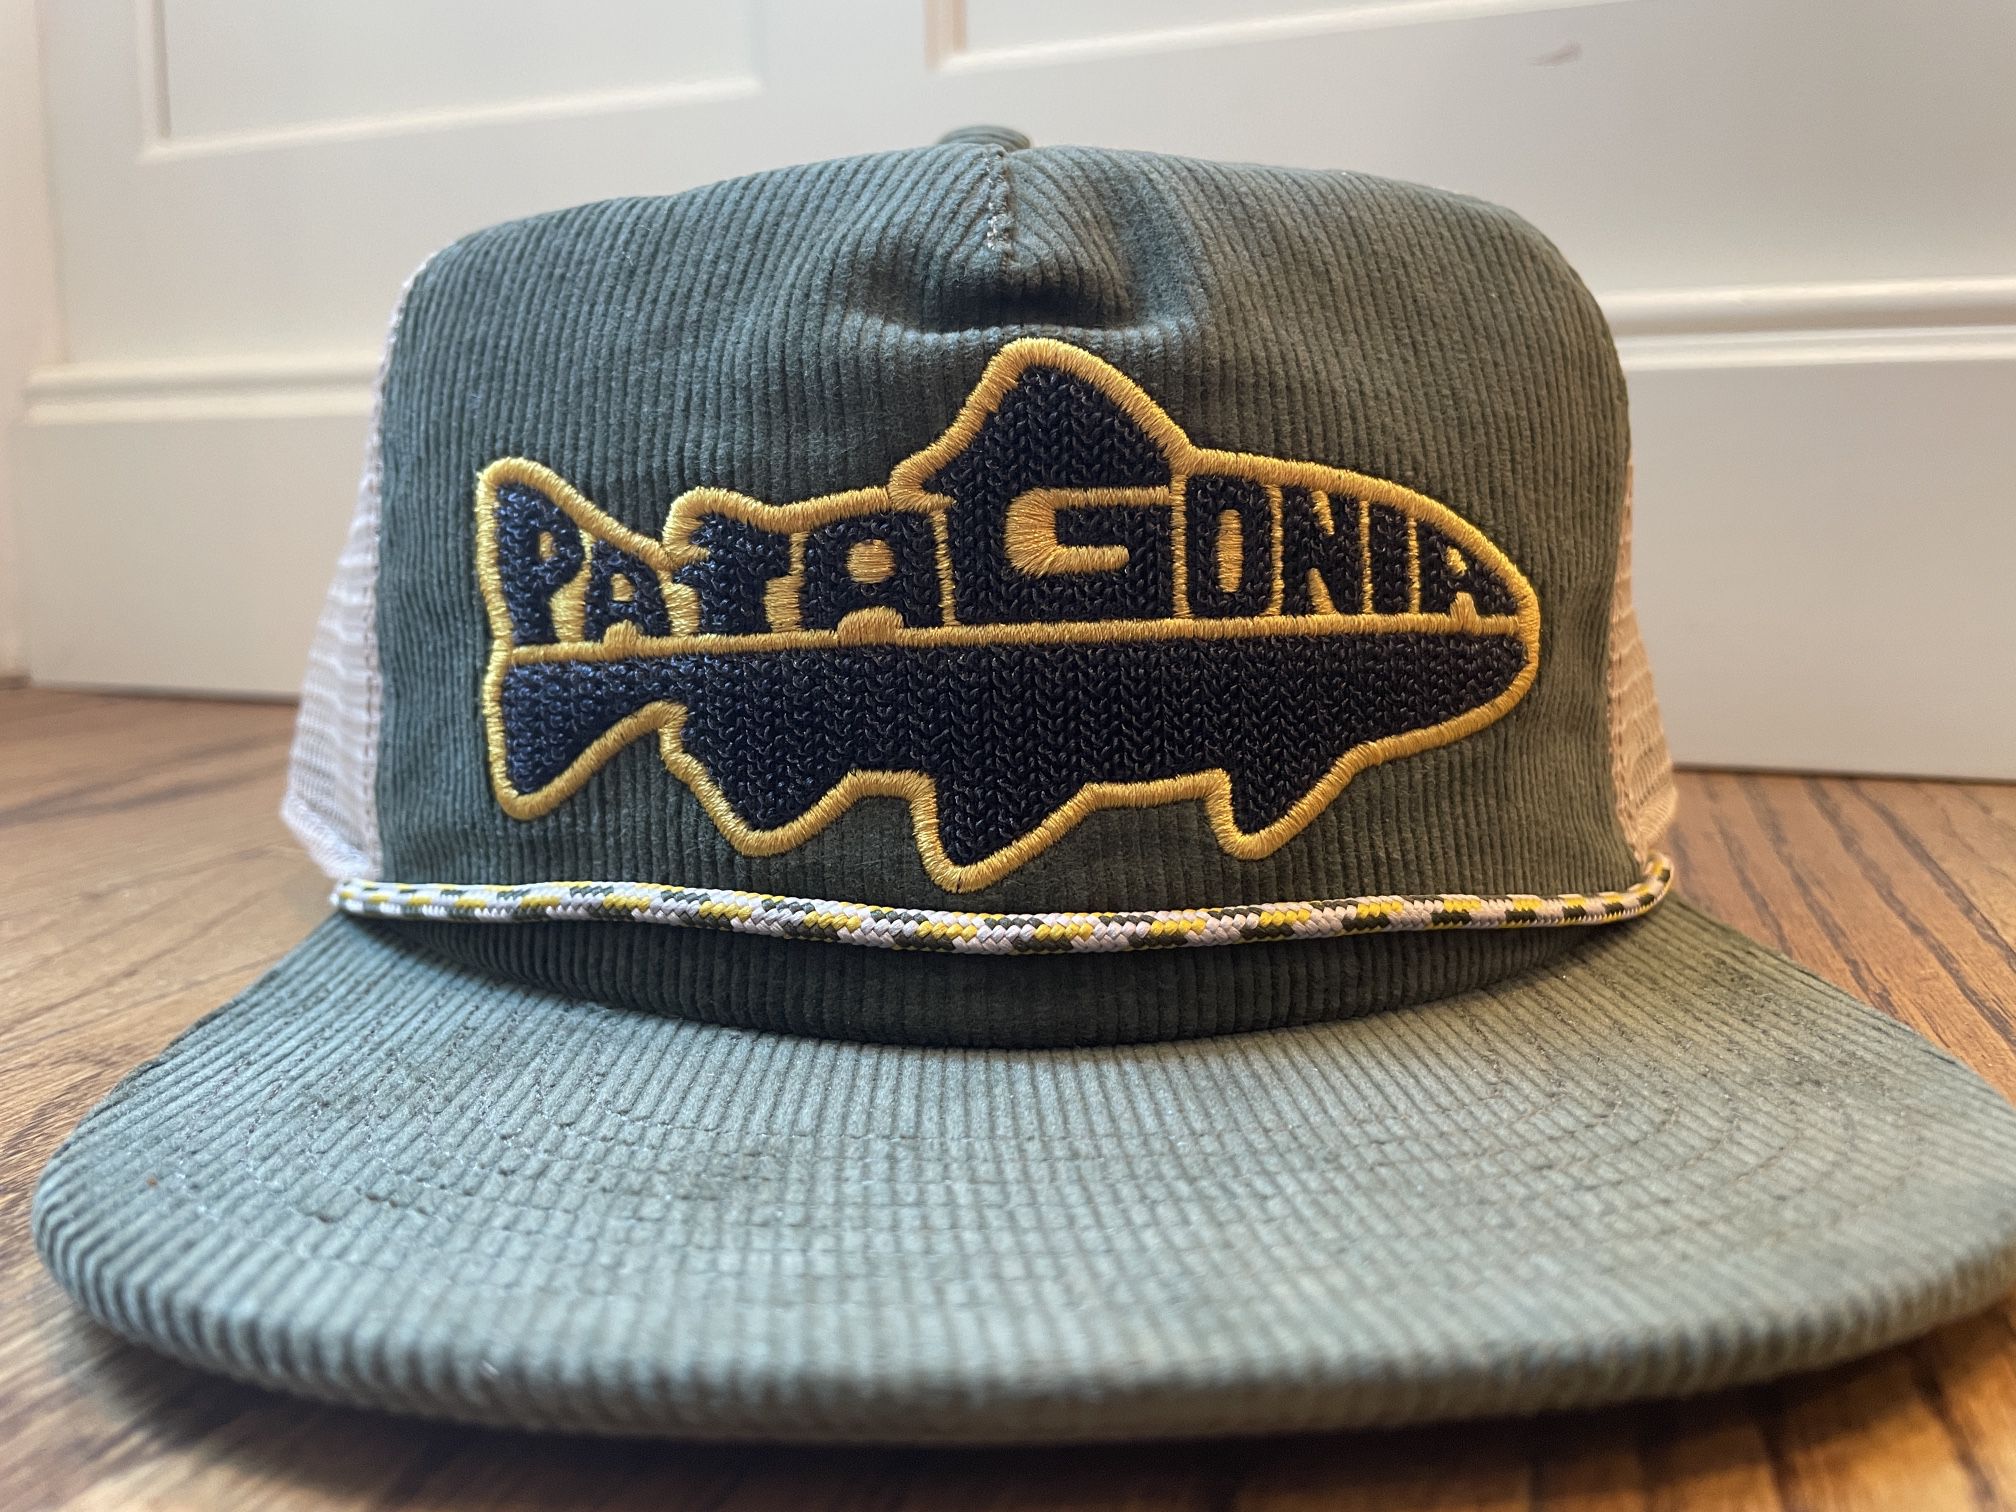 Patagonia Fly Catcher Hat One Size Wild Waterline: Industrial Green Trout NWT. Condition is brand new with tags! This Patagonia Fly Catcher Hat is a m